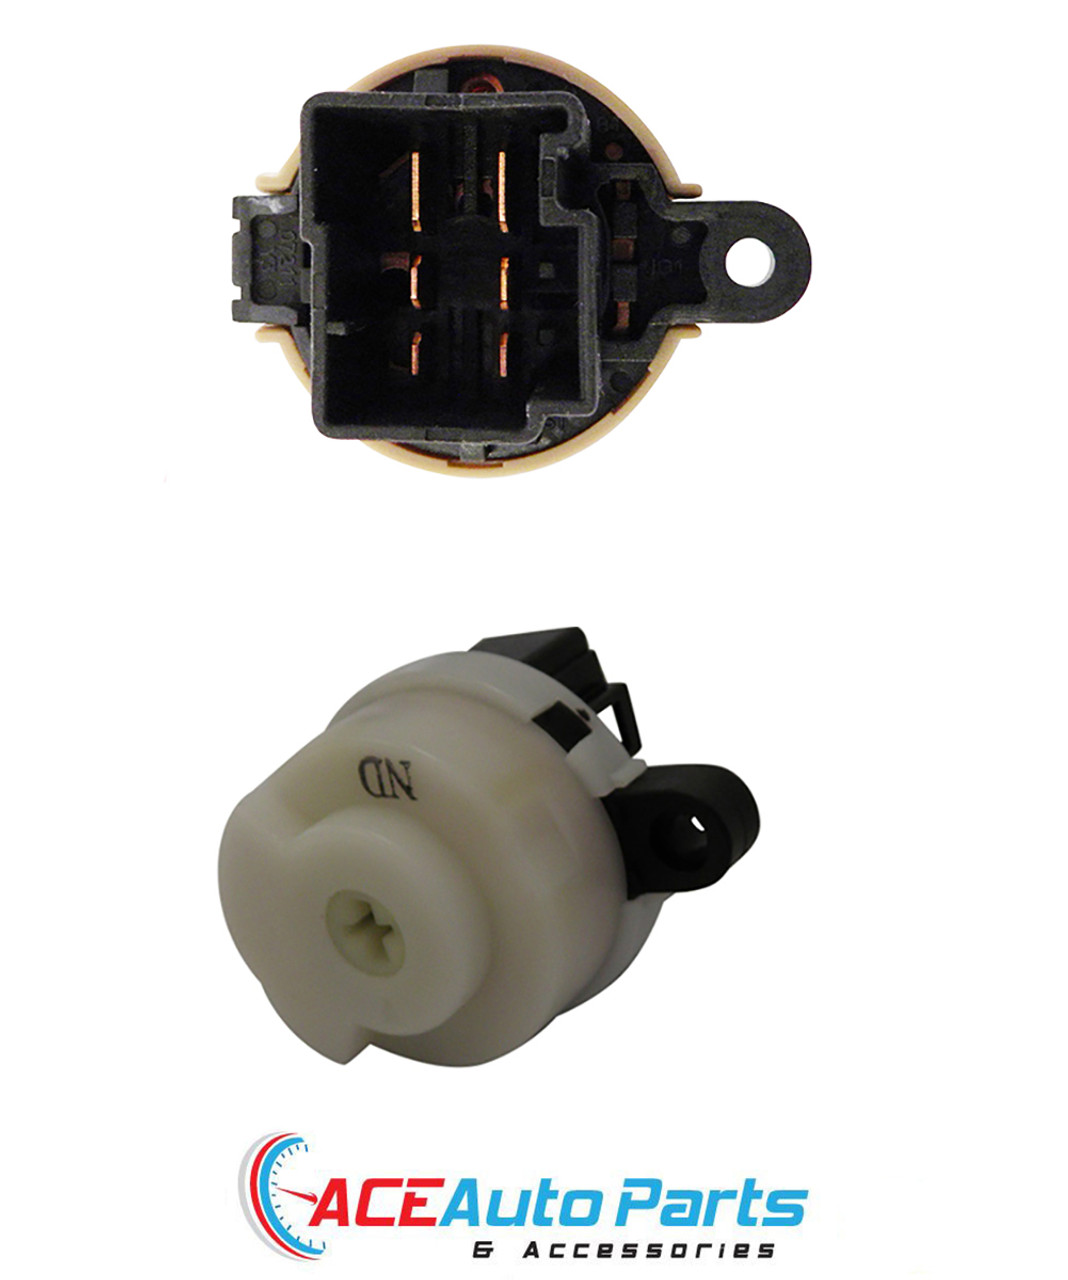 New Ignition Switch for Mazda BT50 UN 2006~2011